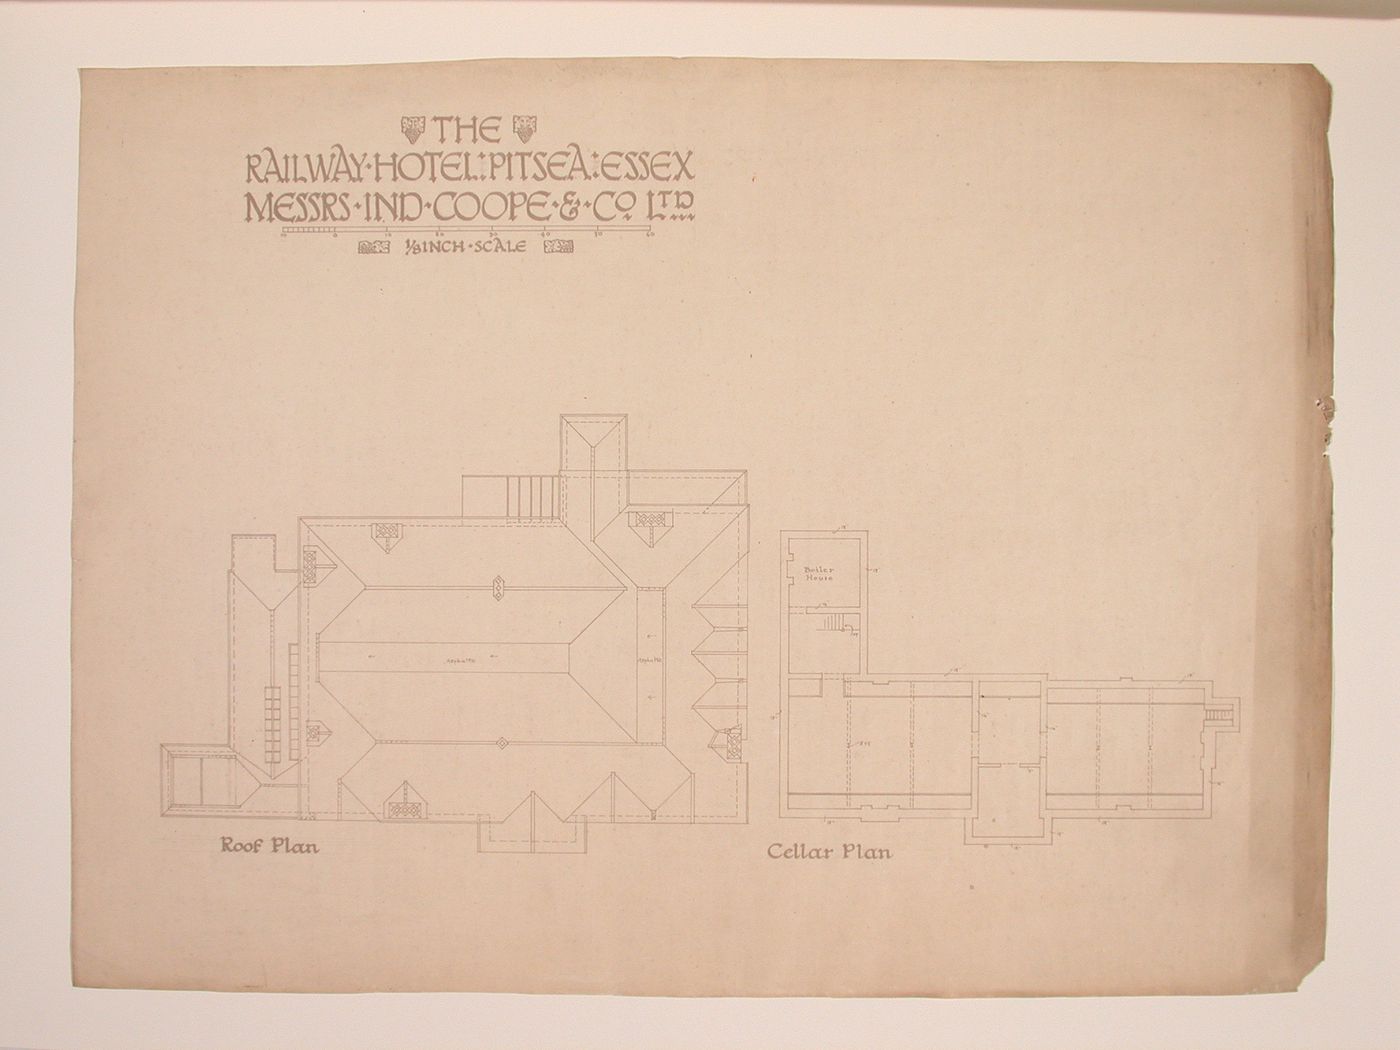 Roof and cellar plans for the Railway Hotel, Pitsea